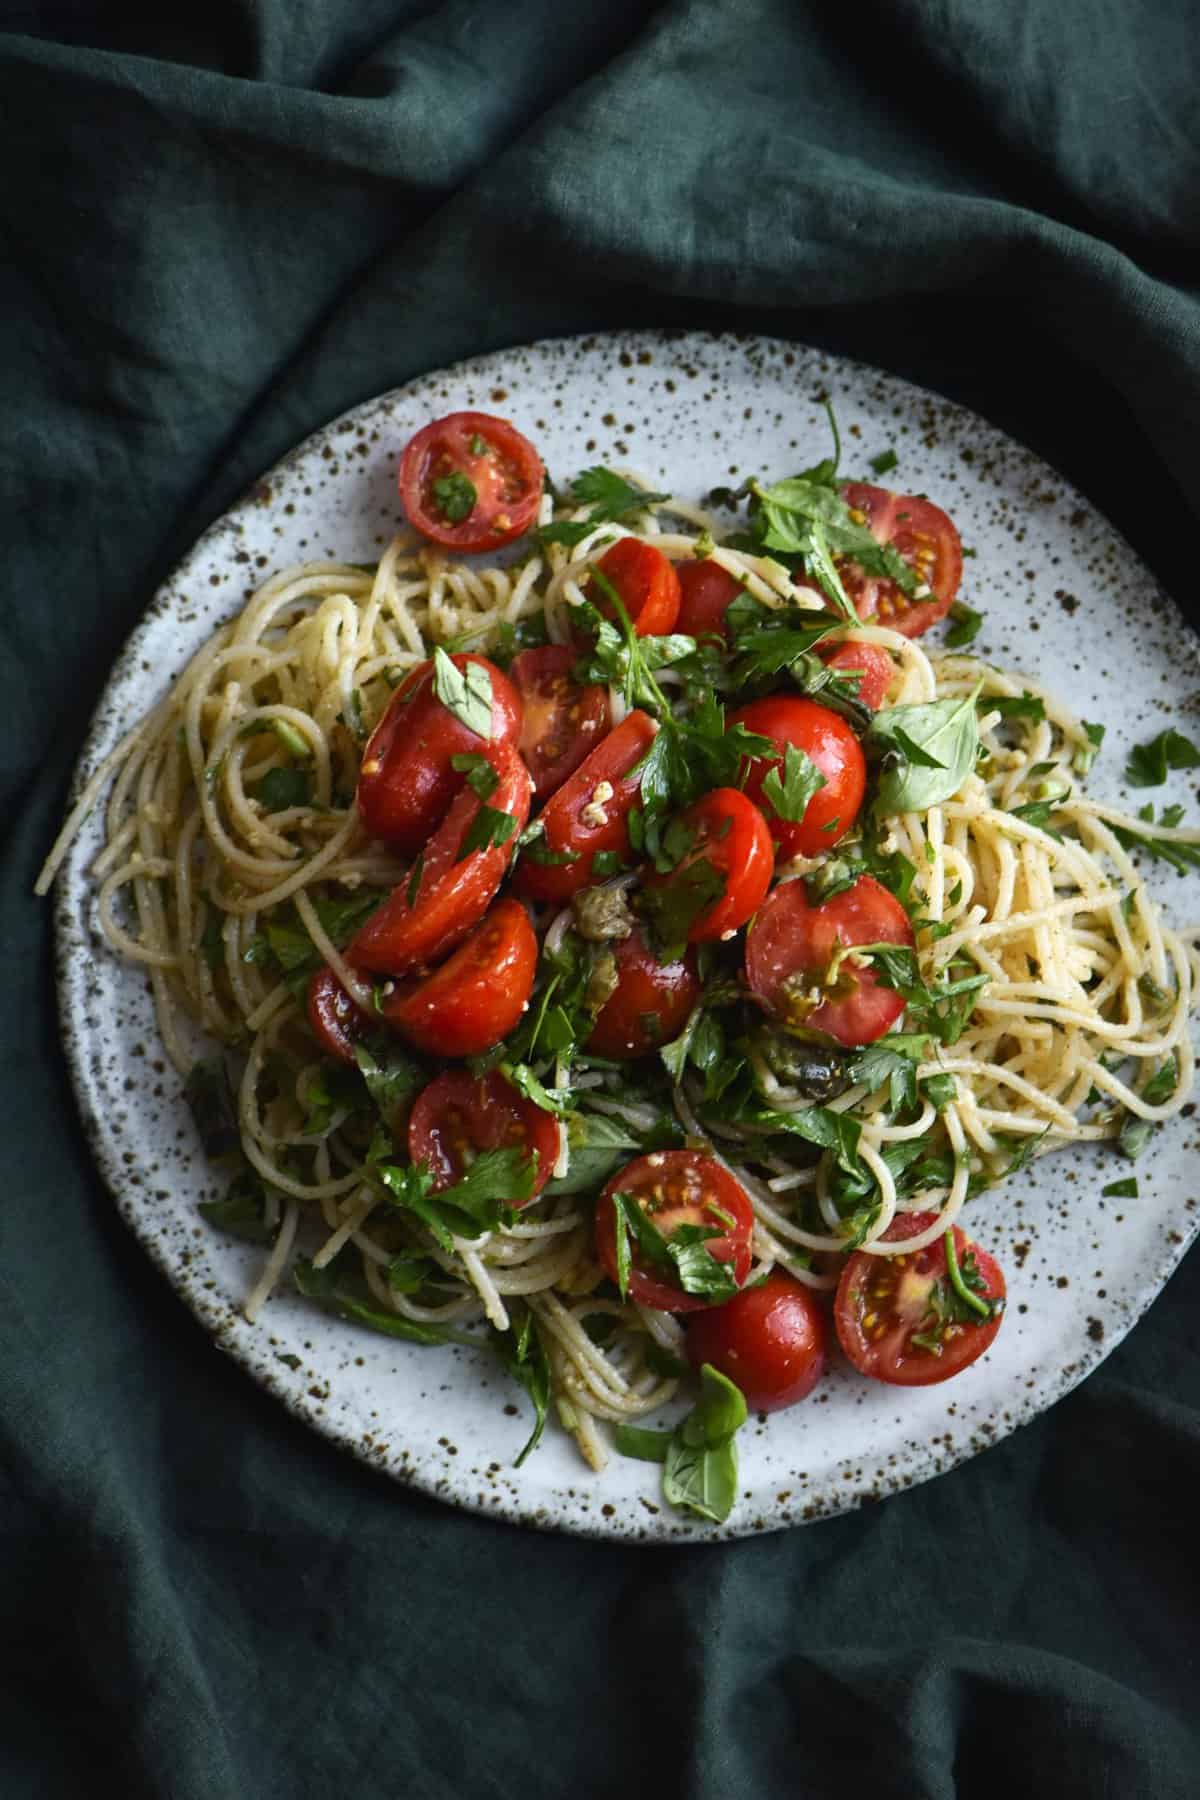 FODMAP friendly pasta with a brown butter, caper, chilli, lemon and herb sauce topped with fresh summer tomatoes, served on a white ceramic plate against a green linen table cloth